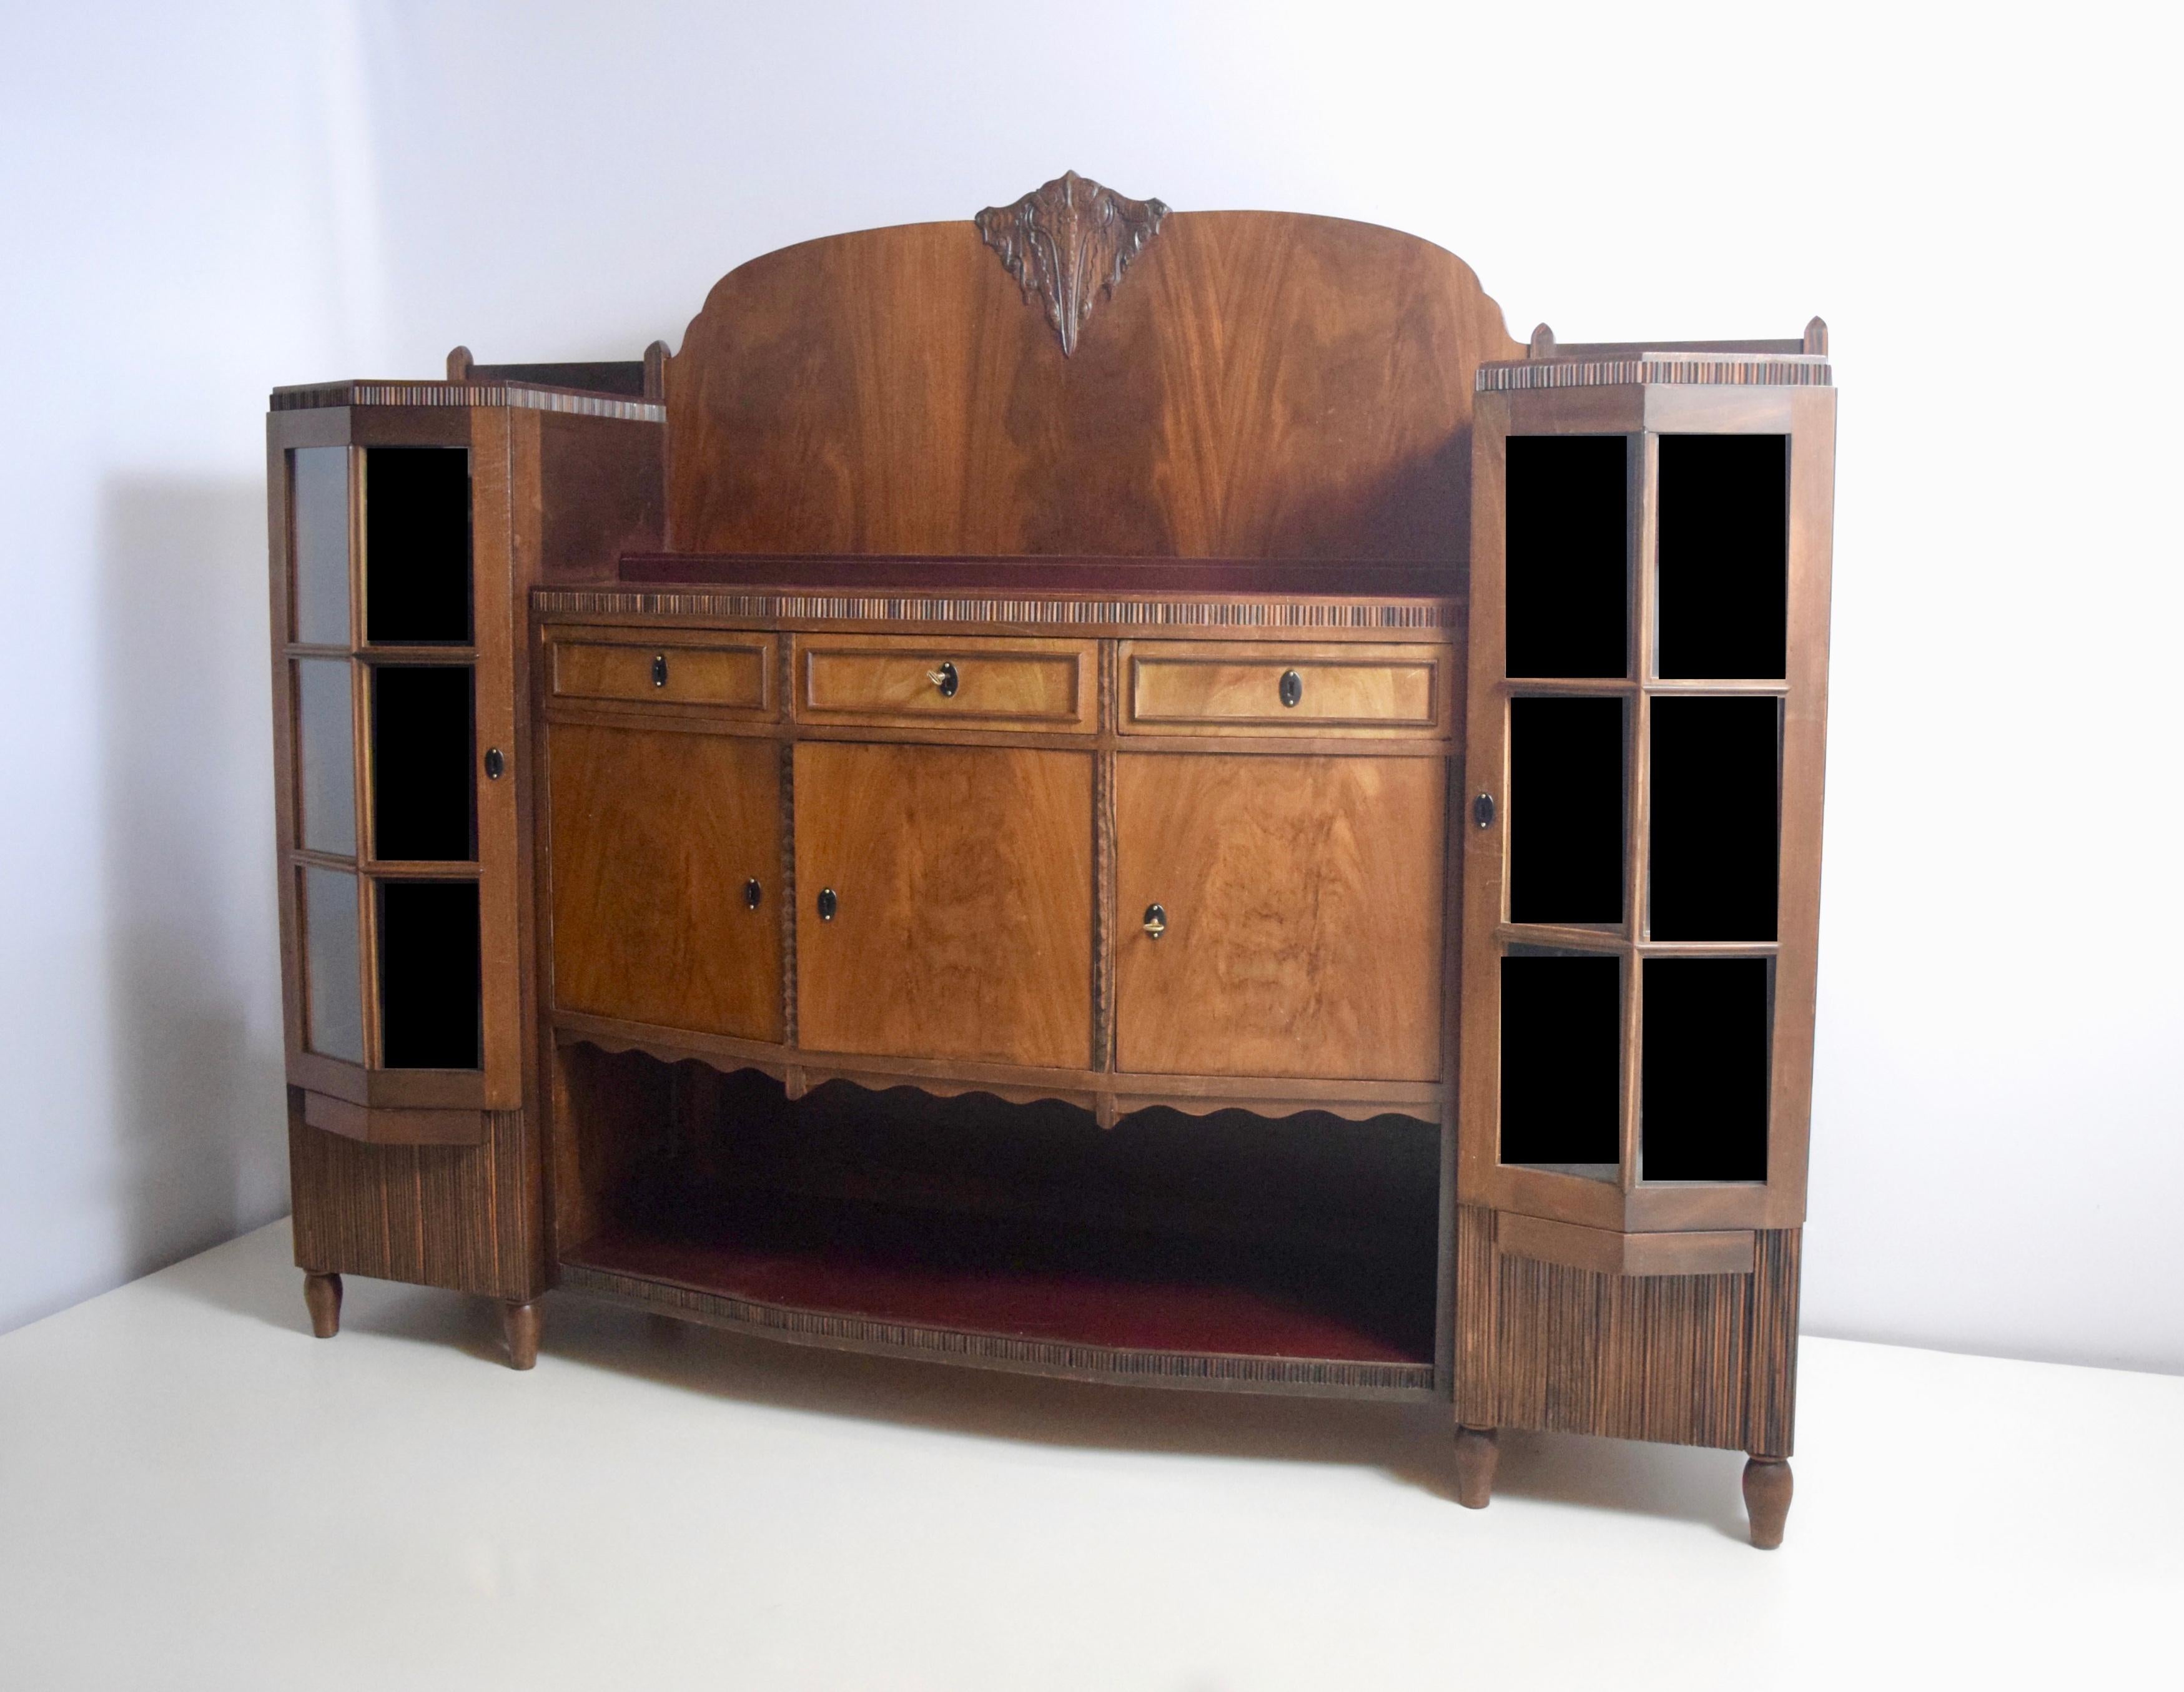 Art Deco Amsterdam School Bar Cabinet by J. Th. Drilling, 1924, the Netherlands